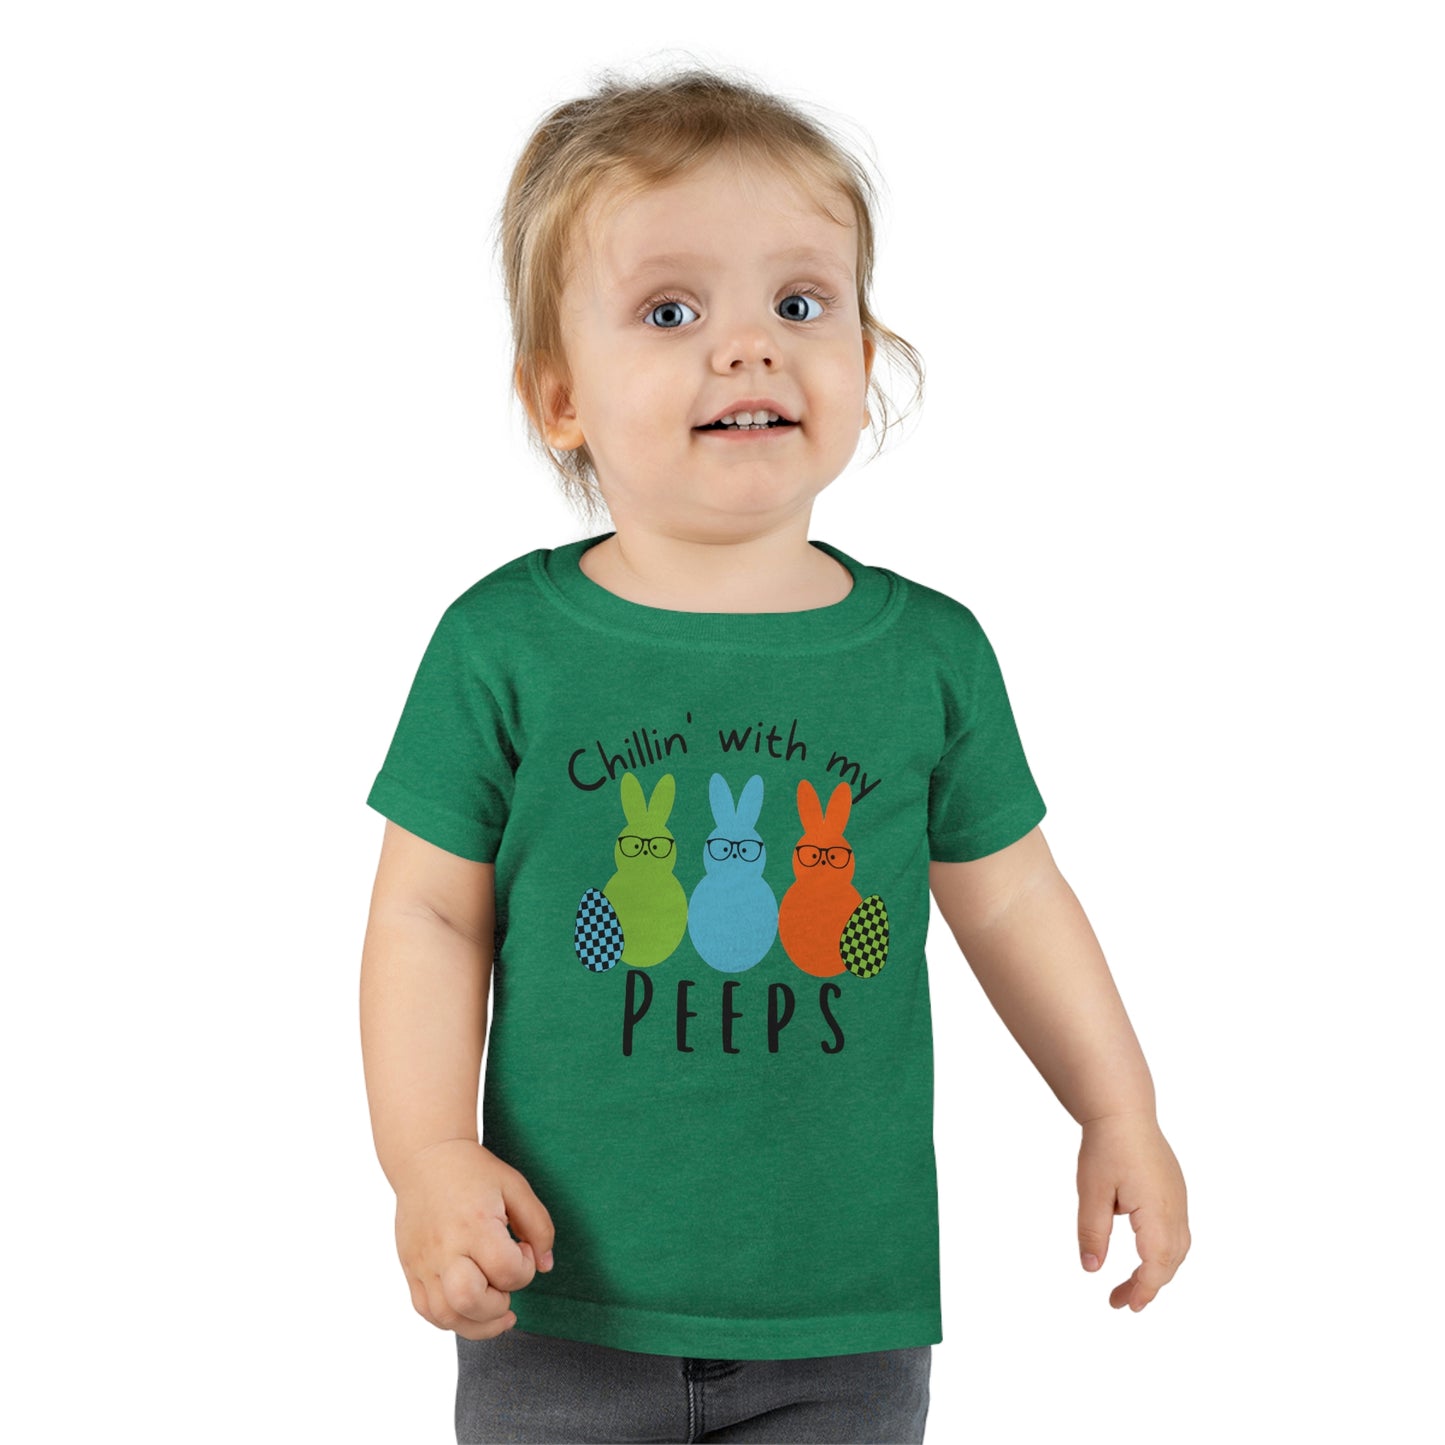 "Chillin' with my Peeps" Toddler Tee